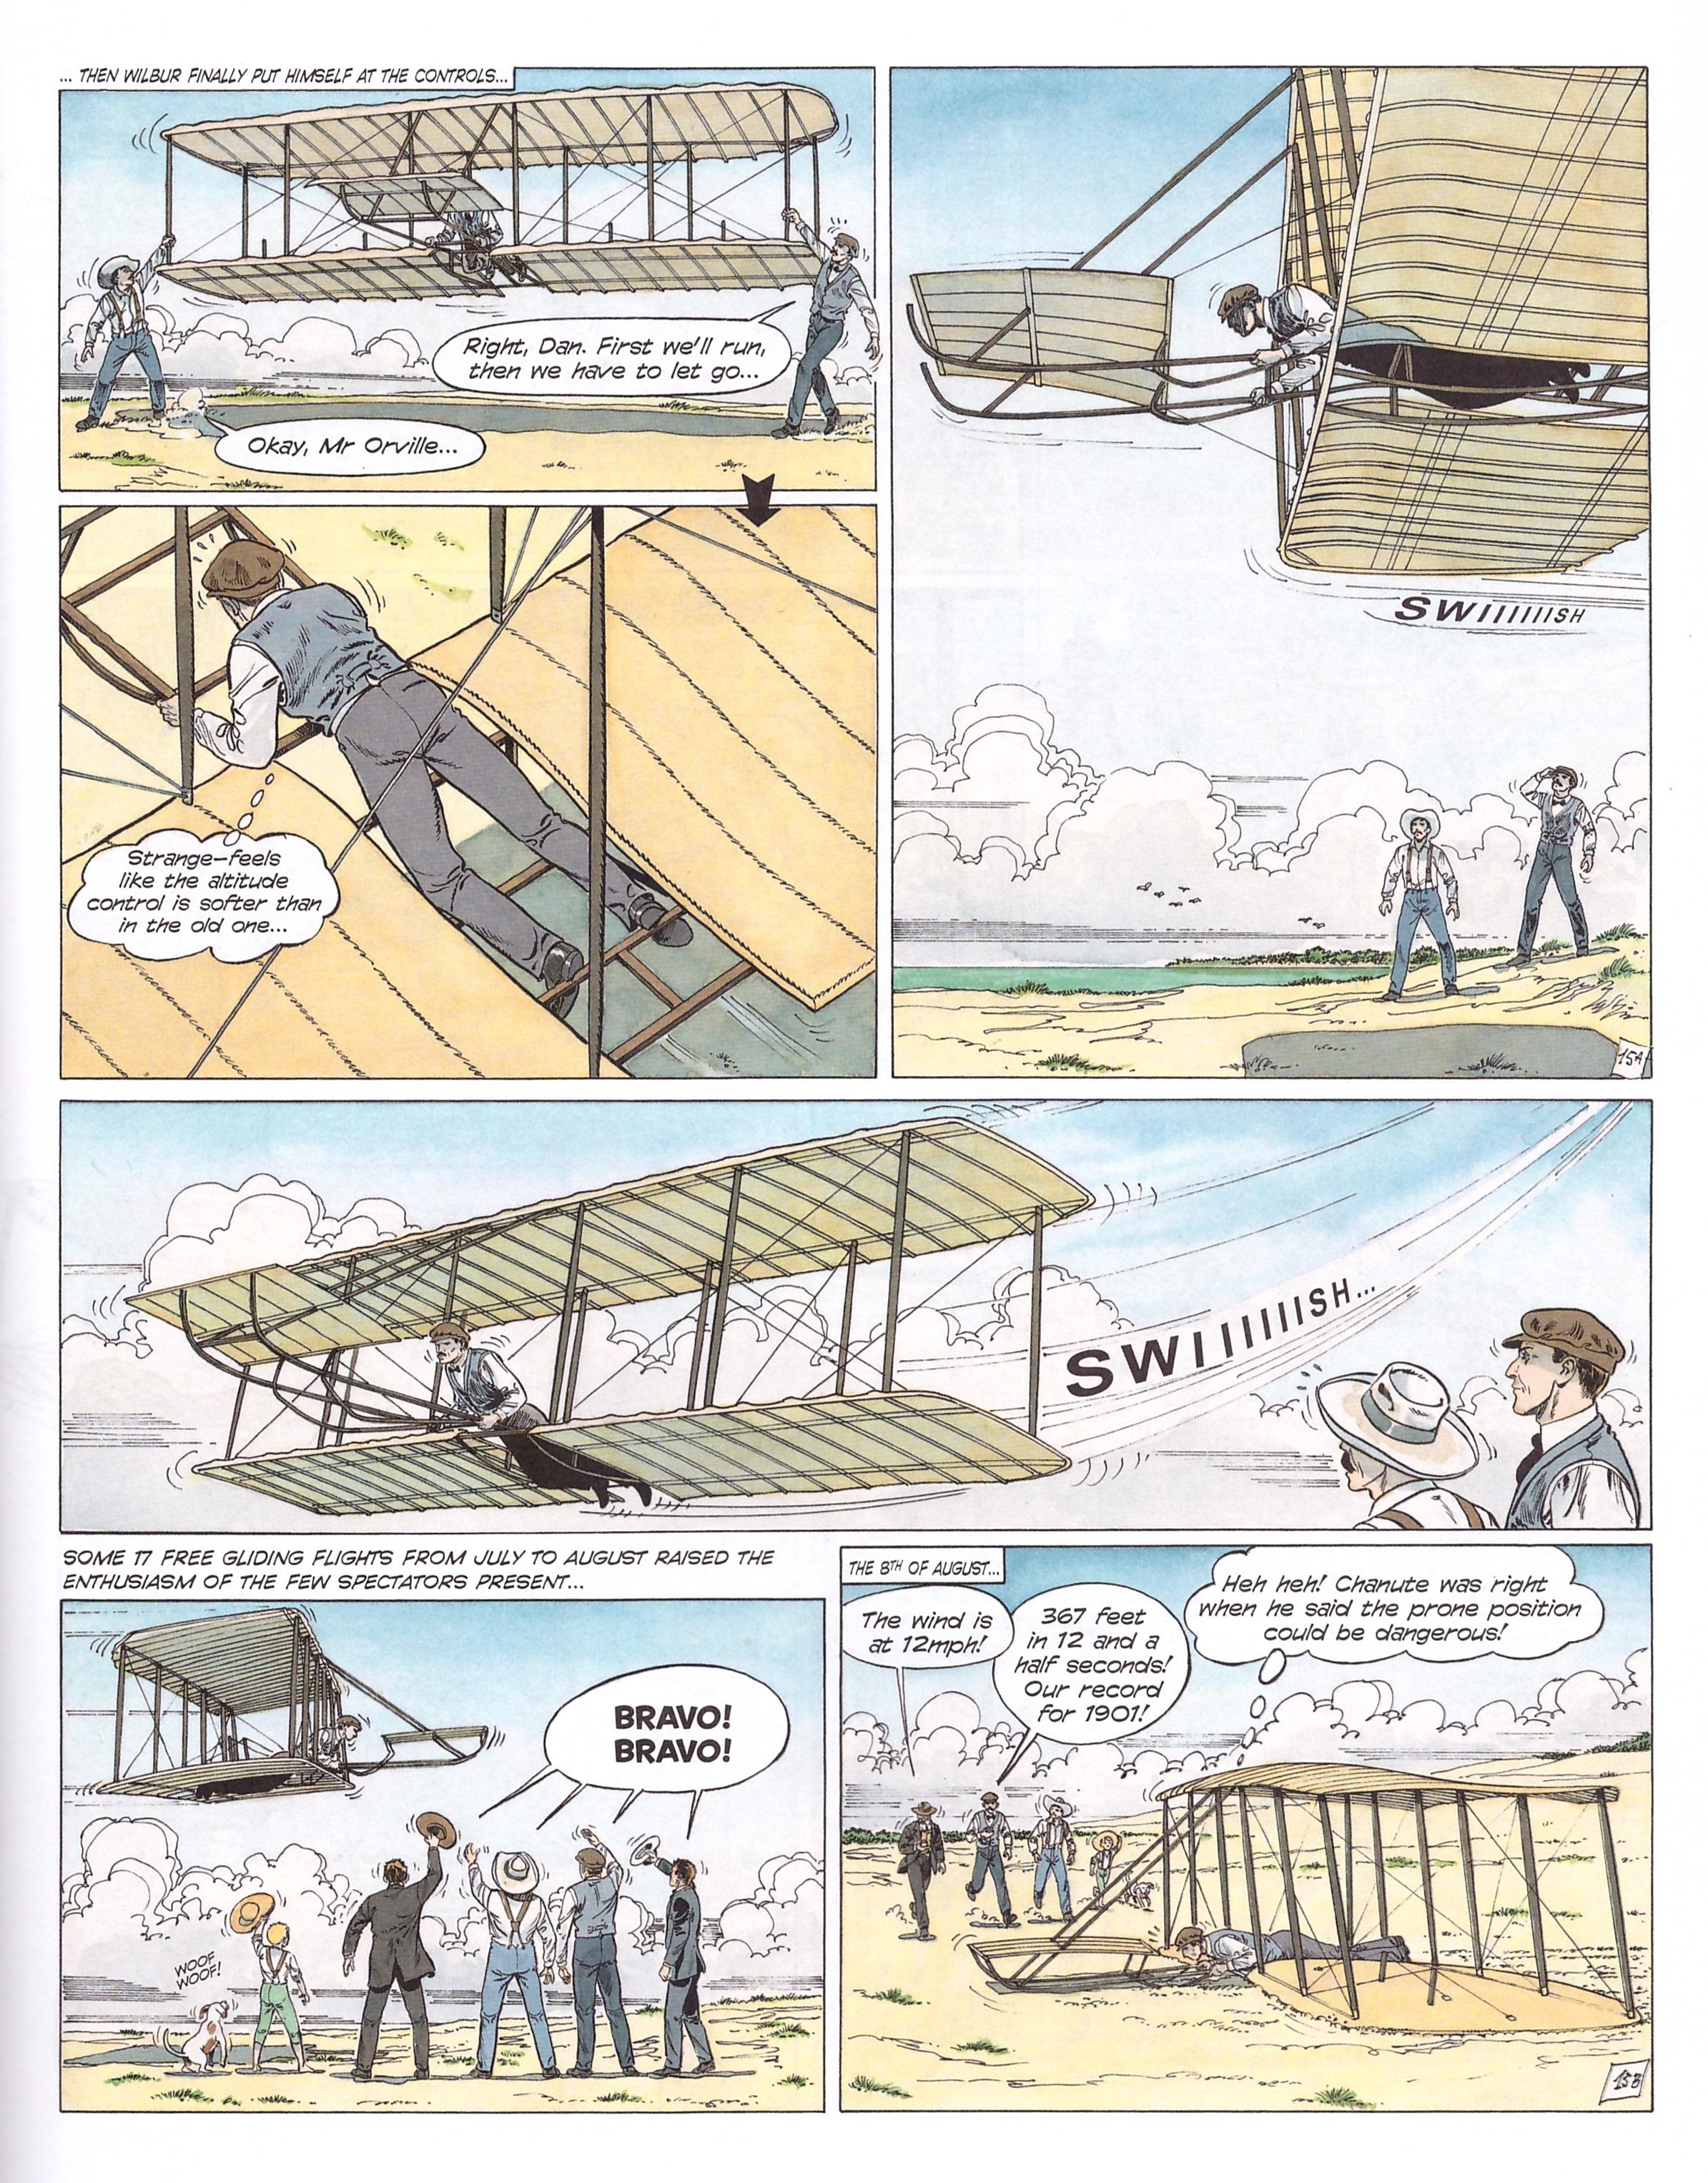 Cinebook Presents the Wright Brothers review